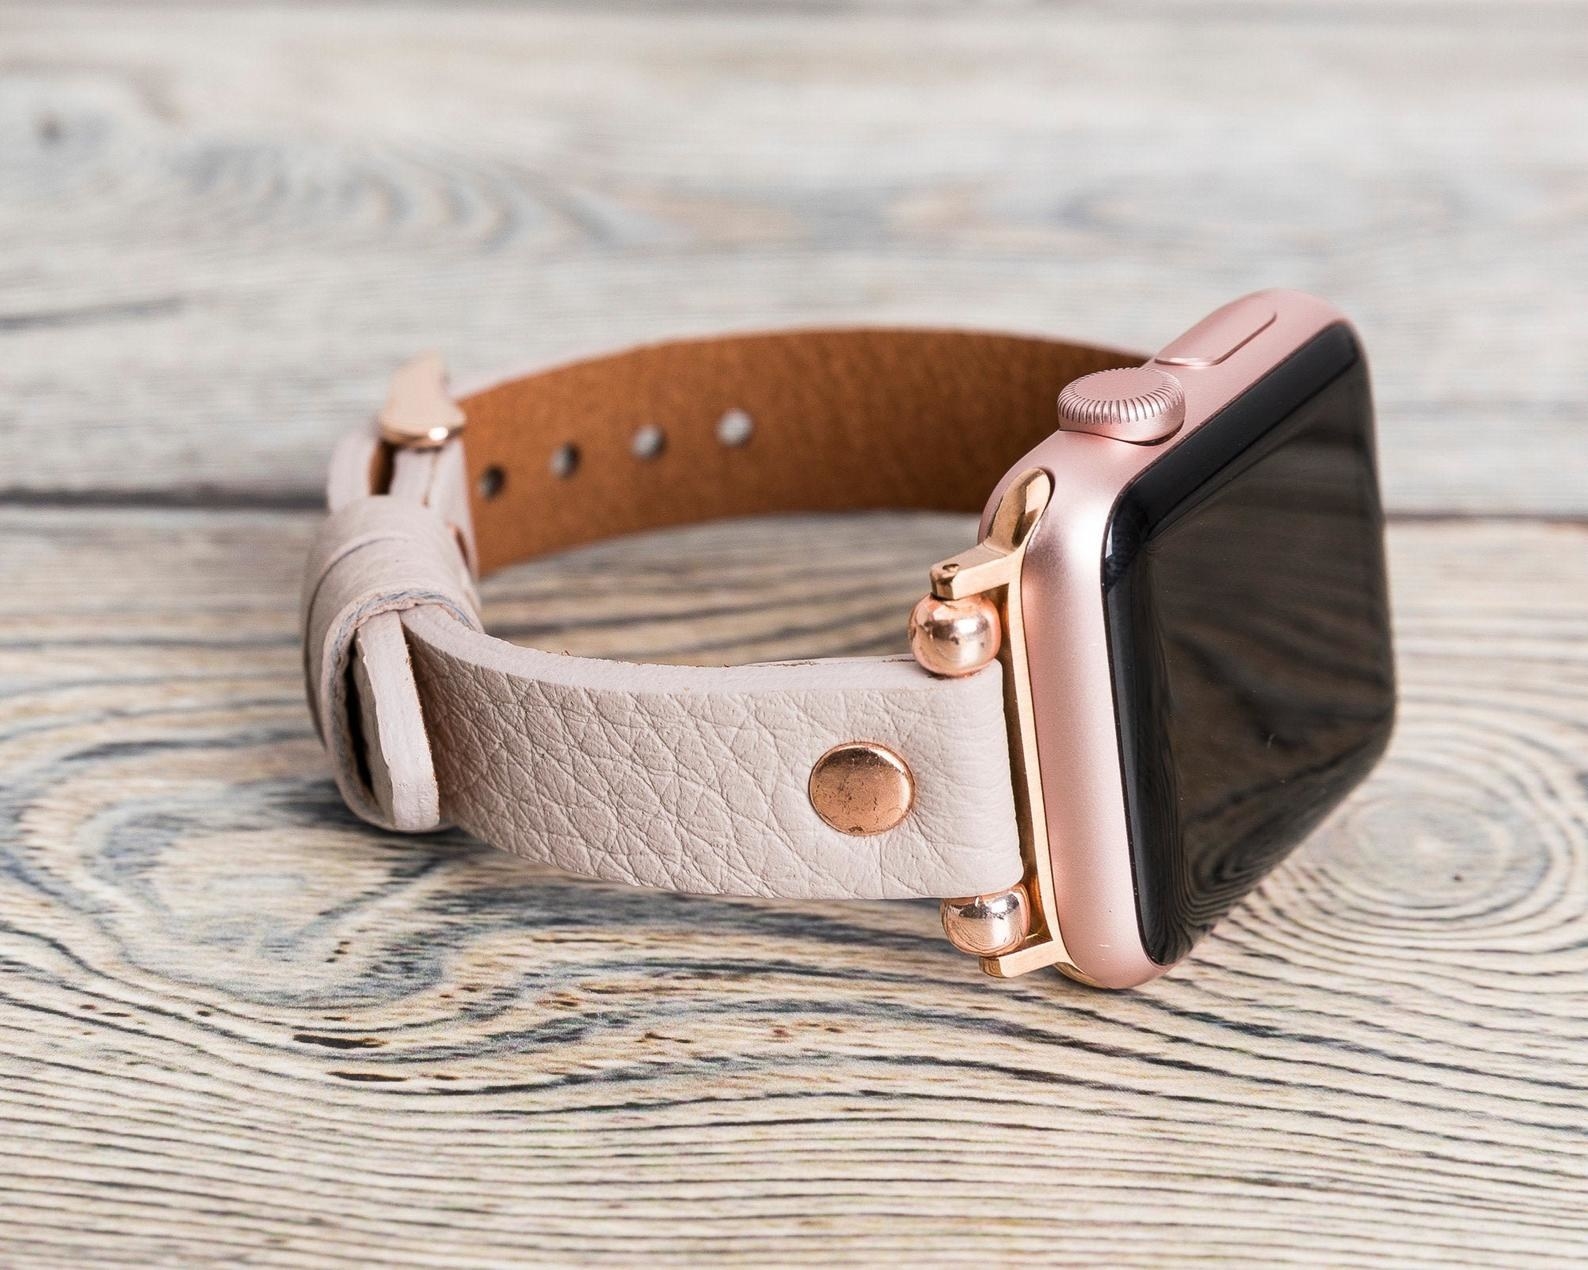 An Apple watch with a pink leather band and rose gold accents